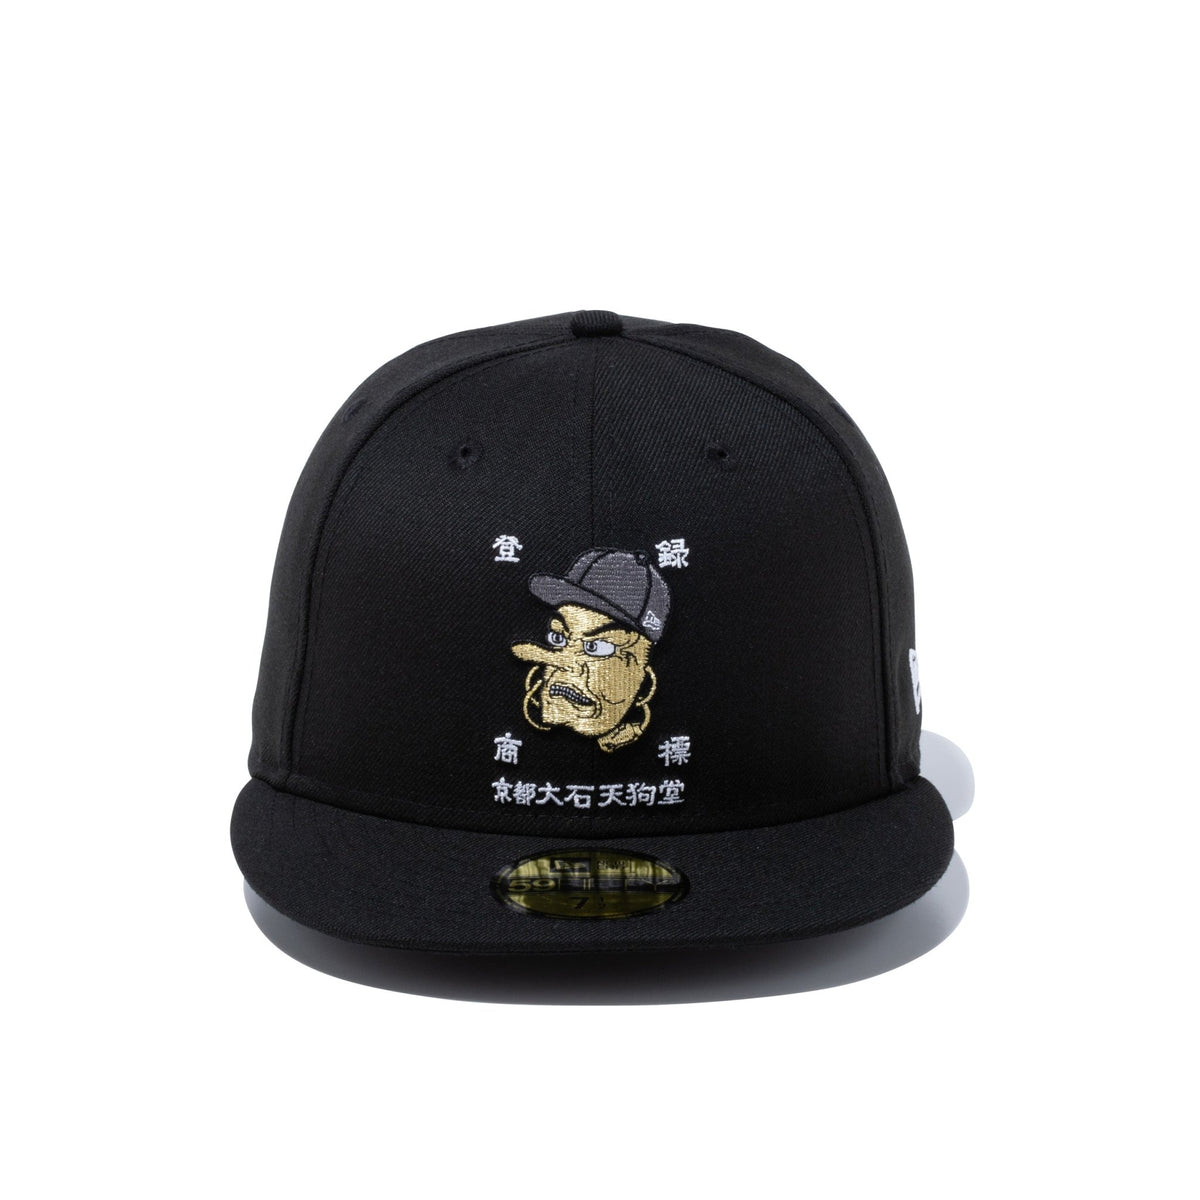 59FIFTY + 花札セット 大石天狗堂 × NEW ERA